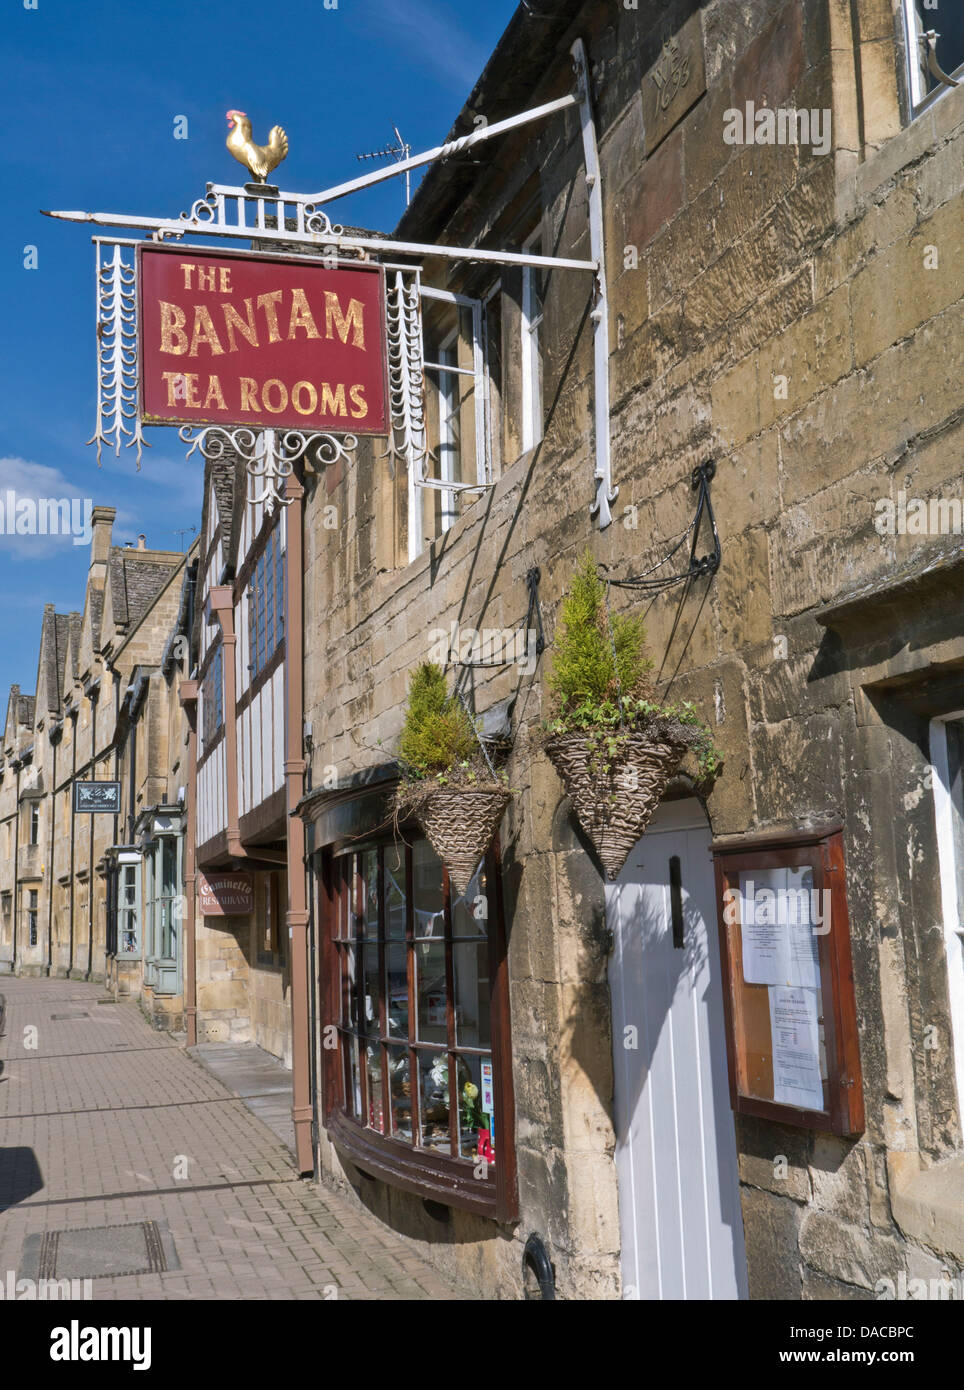 The Bantam tea rooms sign cafe Chipping Campden High Street Cotswolds UK Stock Photo